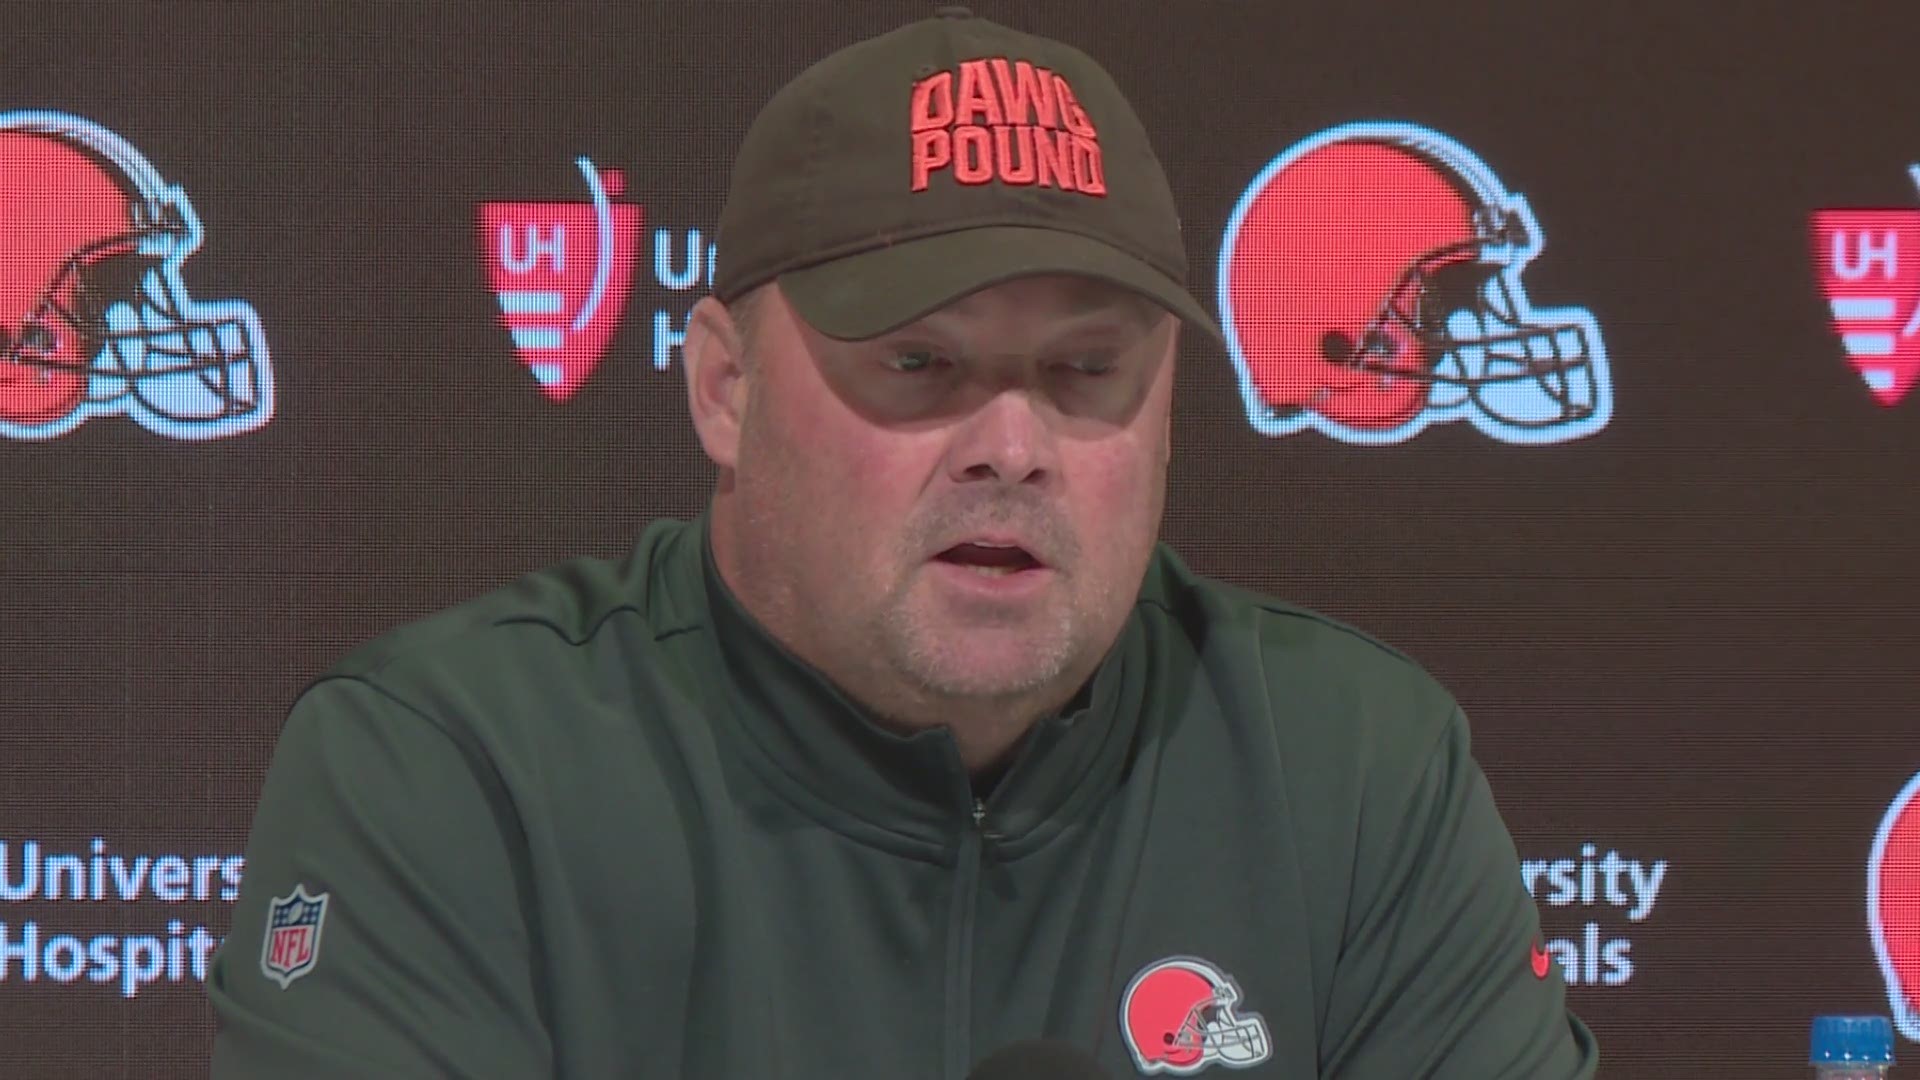 Freddie Kitchens explained why the Browns are focused on coming together and playing as a team after a slow start to the season.